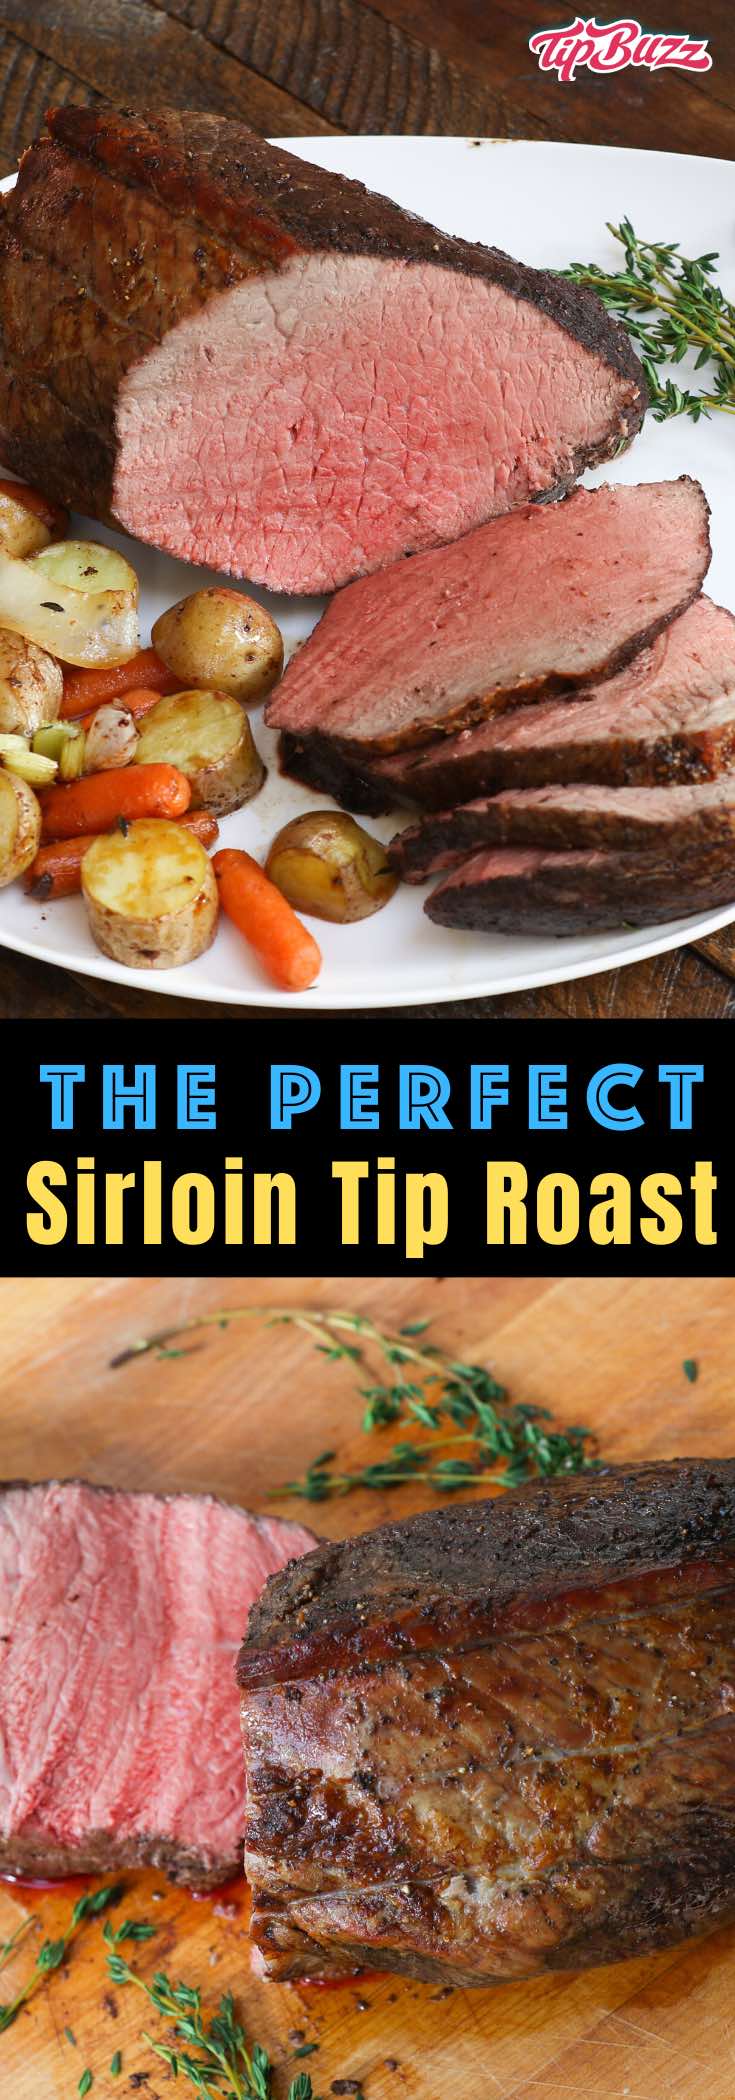 This Sirloin Tip roast is easy to make for a flavorful dinner that's budget-friendly and easy to make. Use the leftovers for sandwiches, soups and salads! #sirlointip #sirloinroast